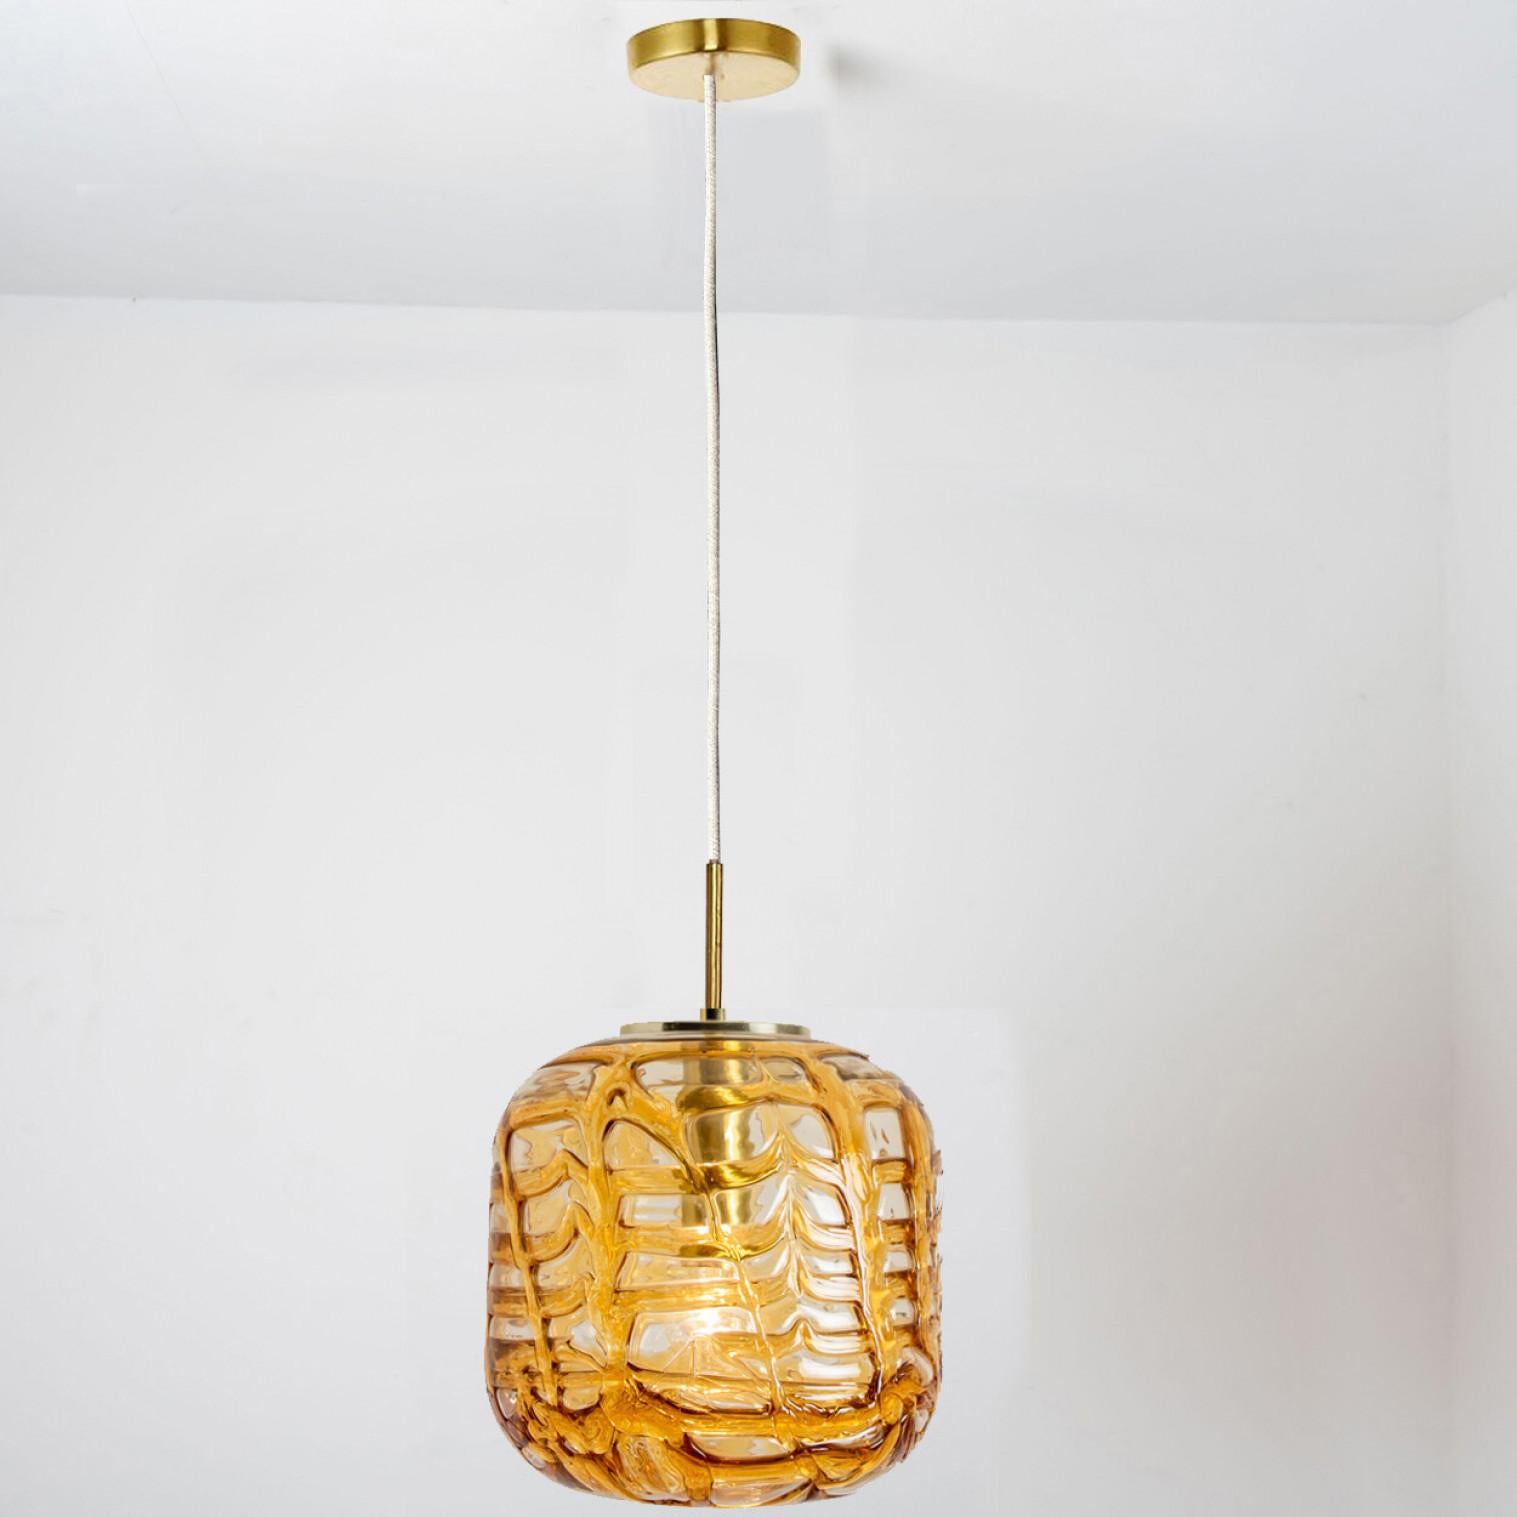 1 of 3 Mixed Colored Glass Pendant Lights, Germany, 1960s For Sale 11